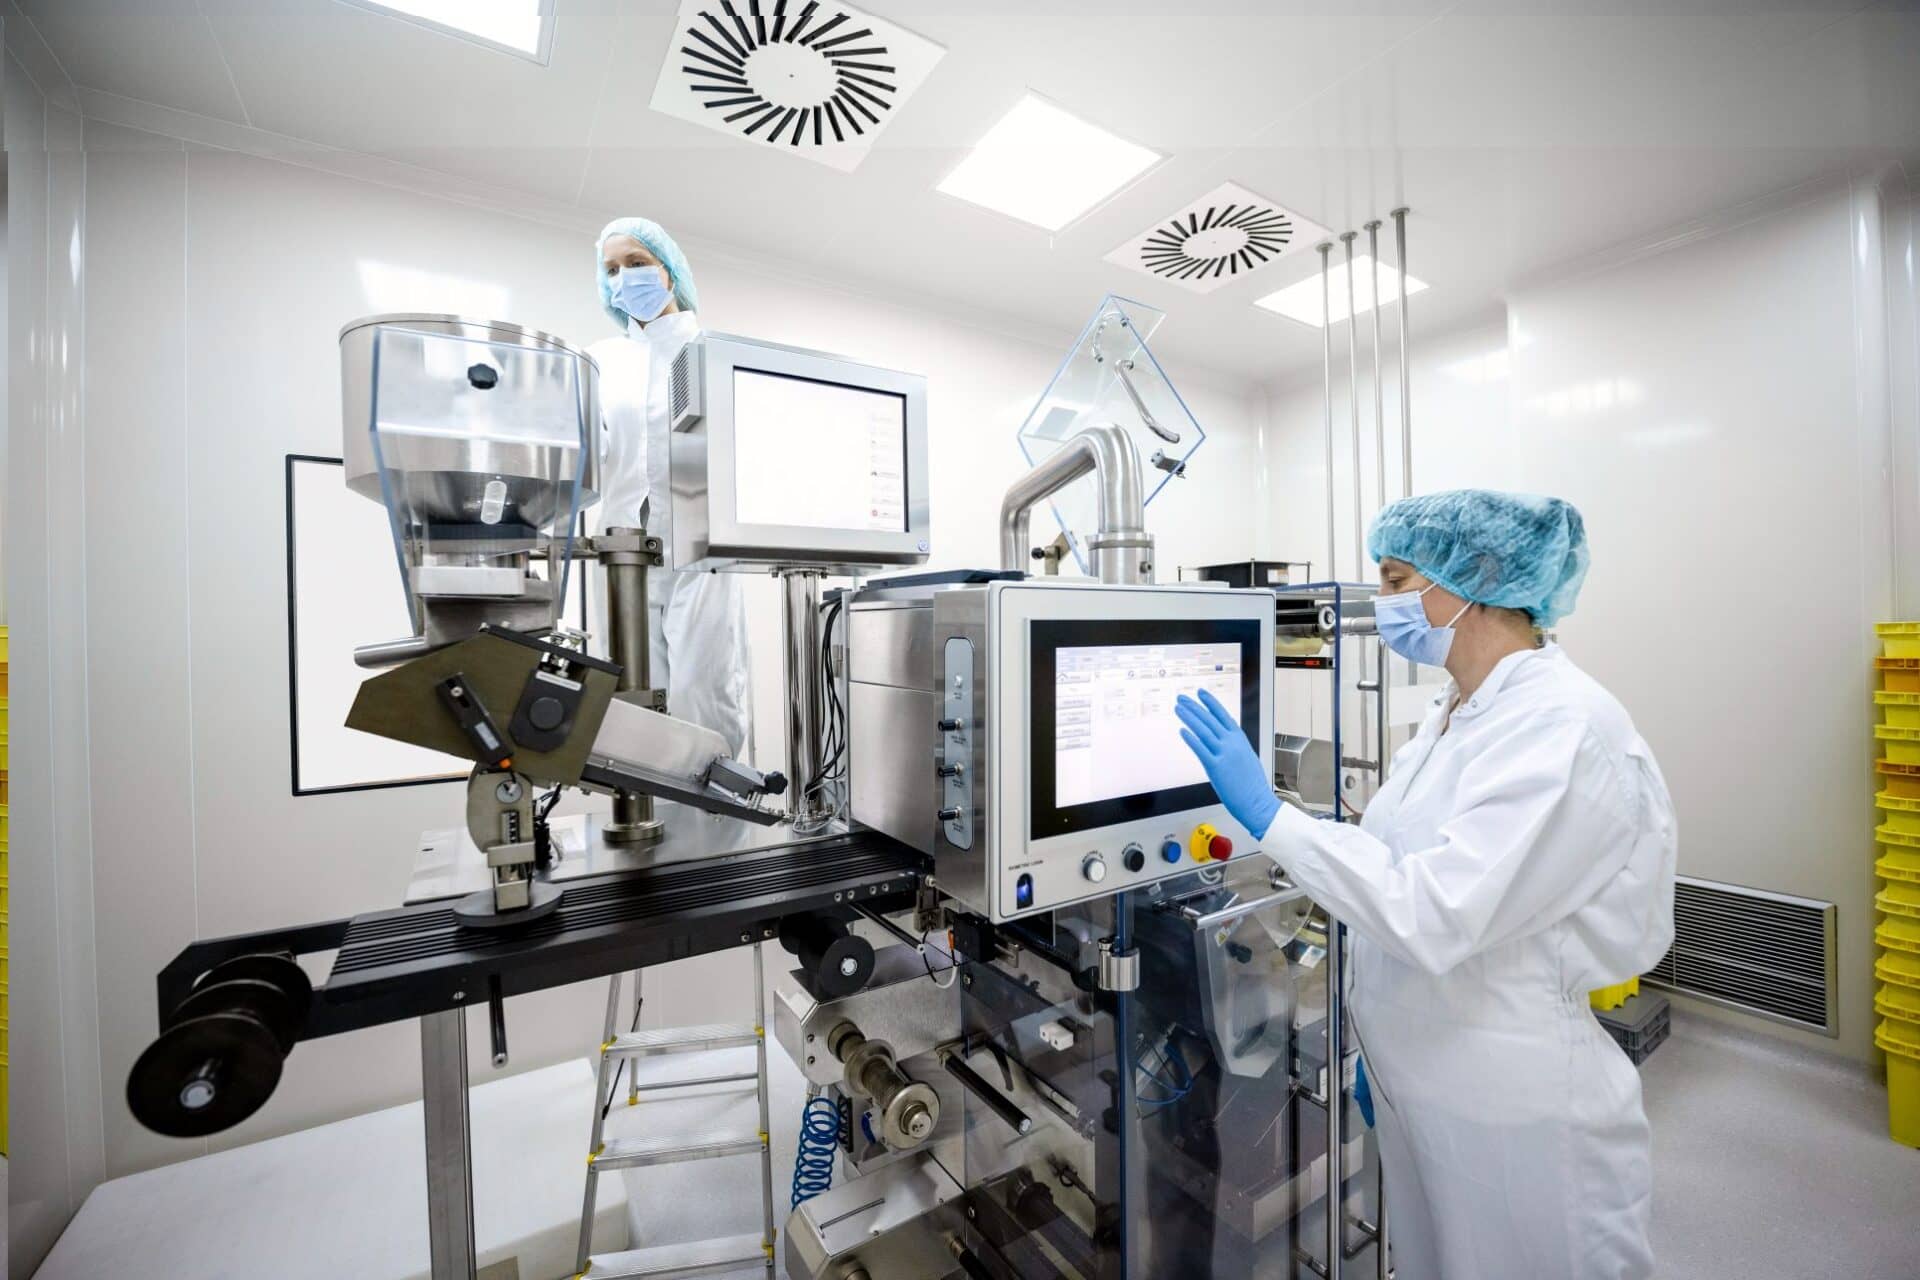 Female scientist in pharmaceutical industry seen standing in front of the screen on the very complex machine and taping on it while wearing protective white suit, blue gloves, a face mask and a cap during her day shift.